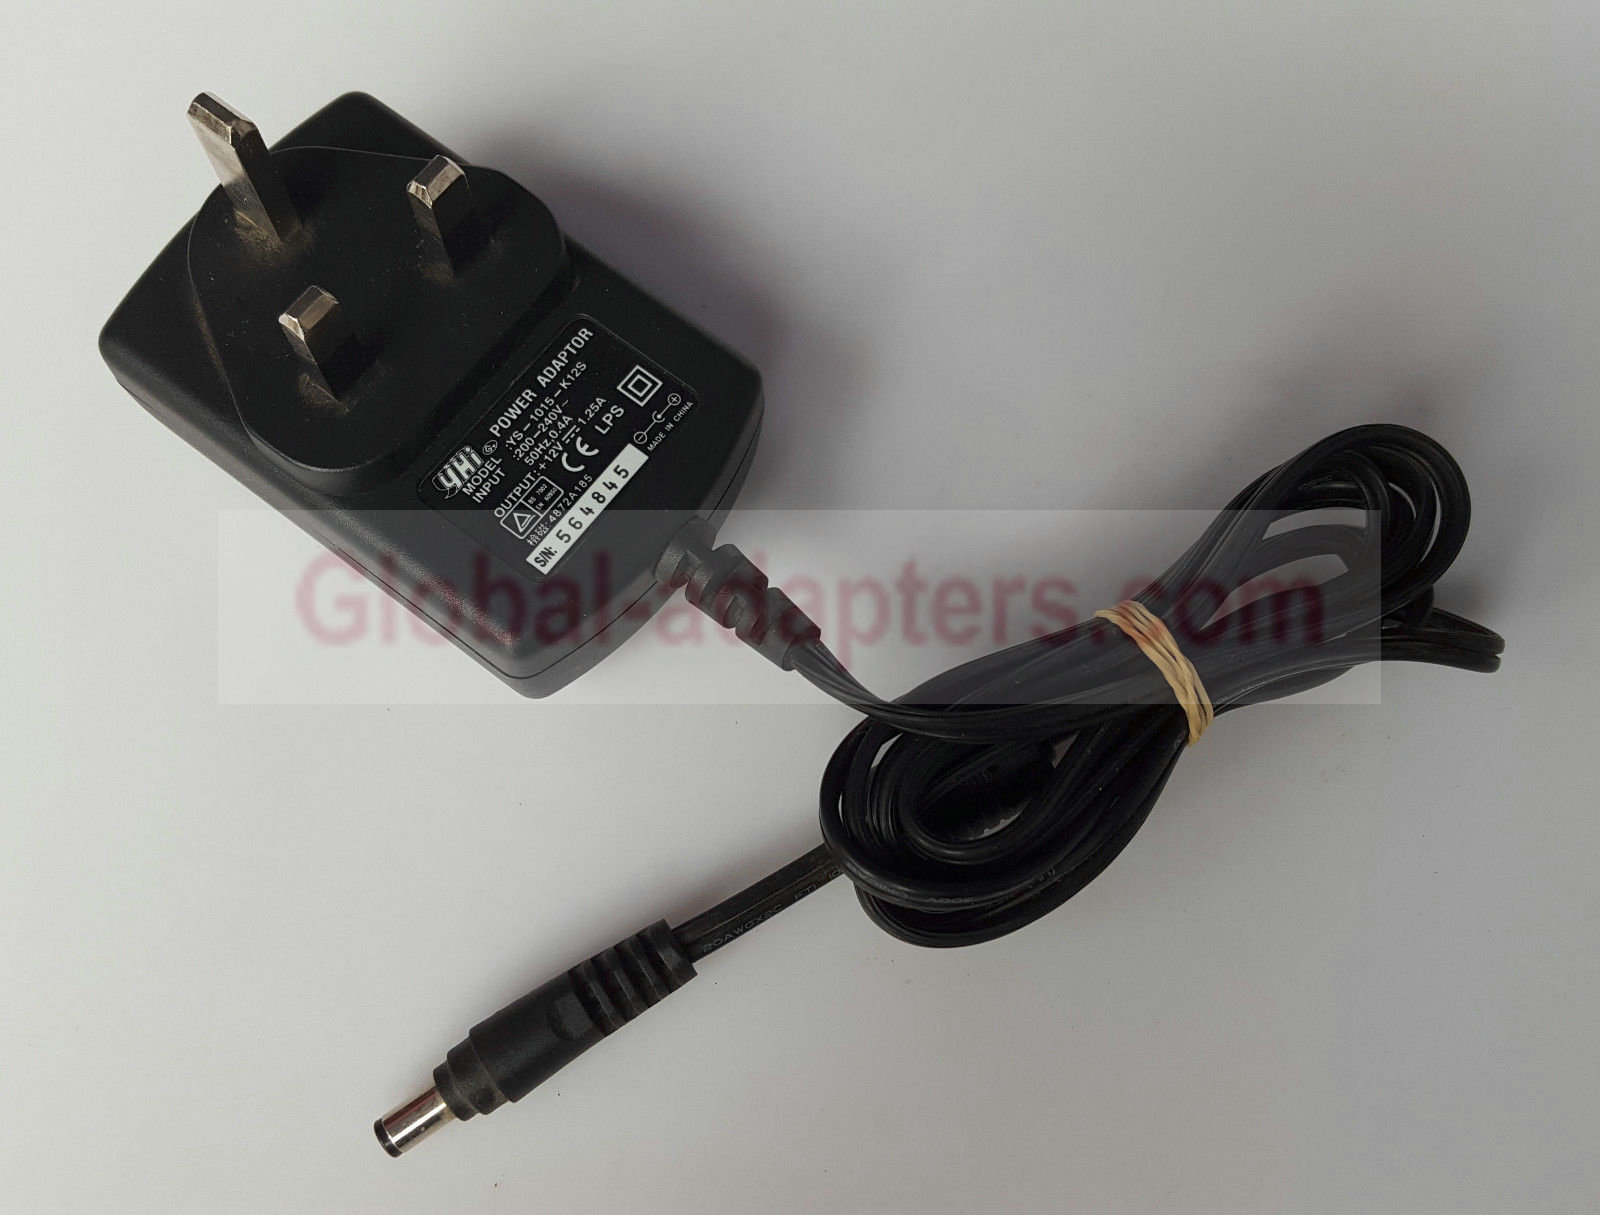 NEW 12V 1.25A YHI YS-1015-K12S AC/DC POWER SUPPLY ADAPTER UK PLUG 4872A185 - Click Image to Close